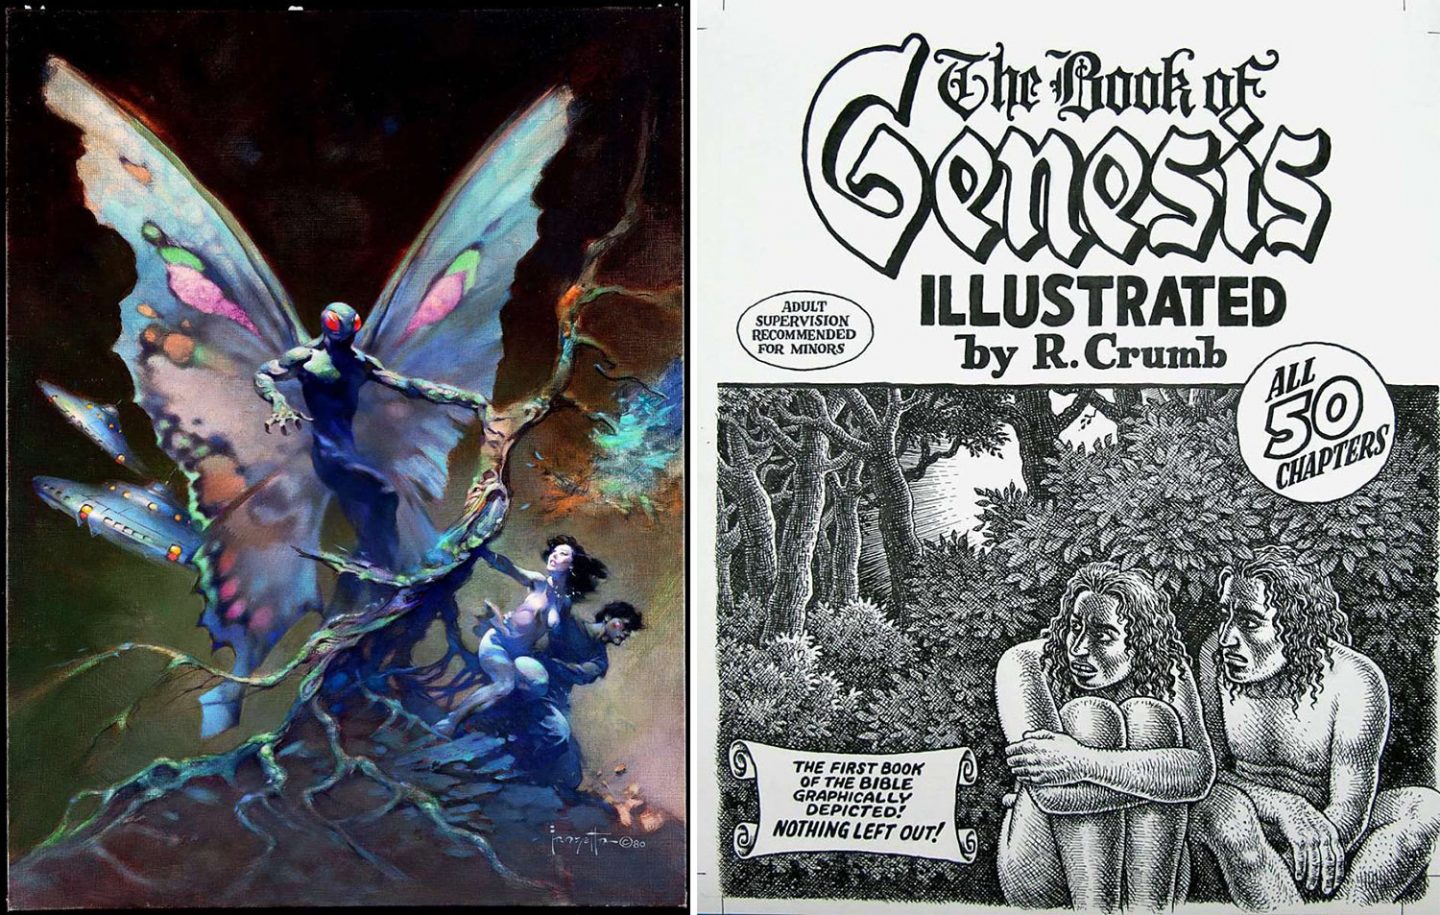 Example of artwork by Frank Frazetta (left) and Robert Crumb that would be part of the museum.